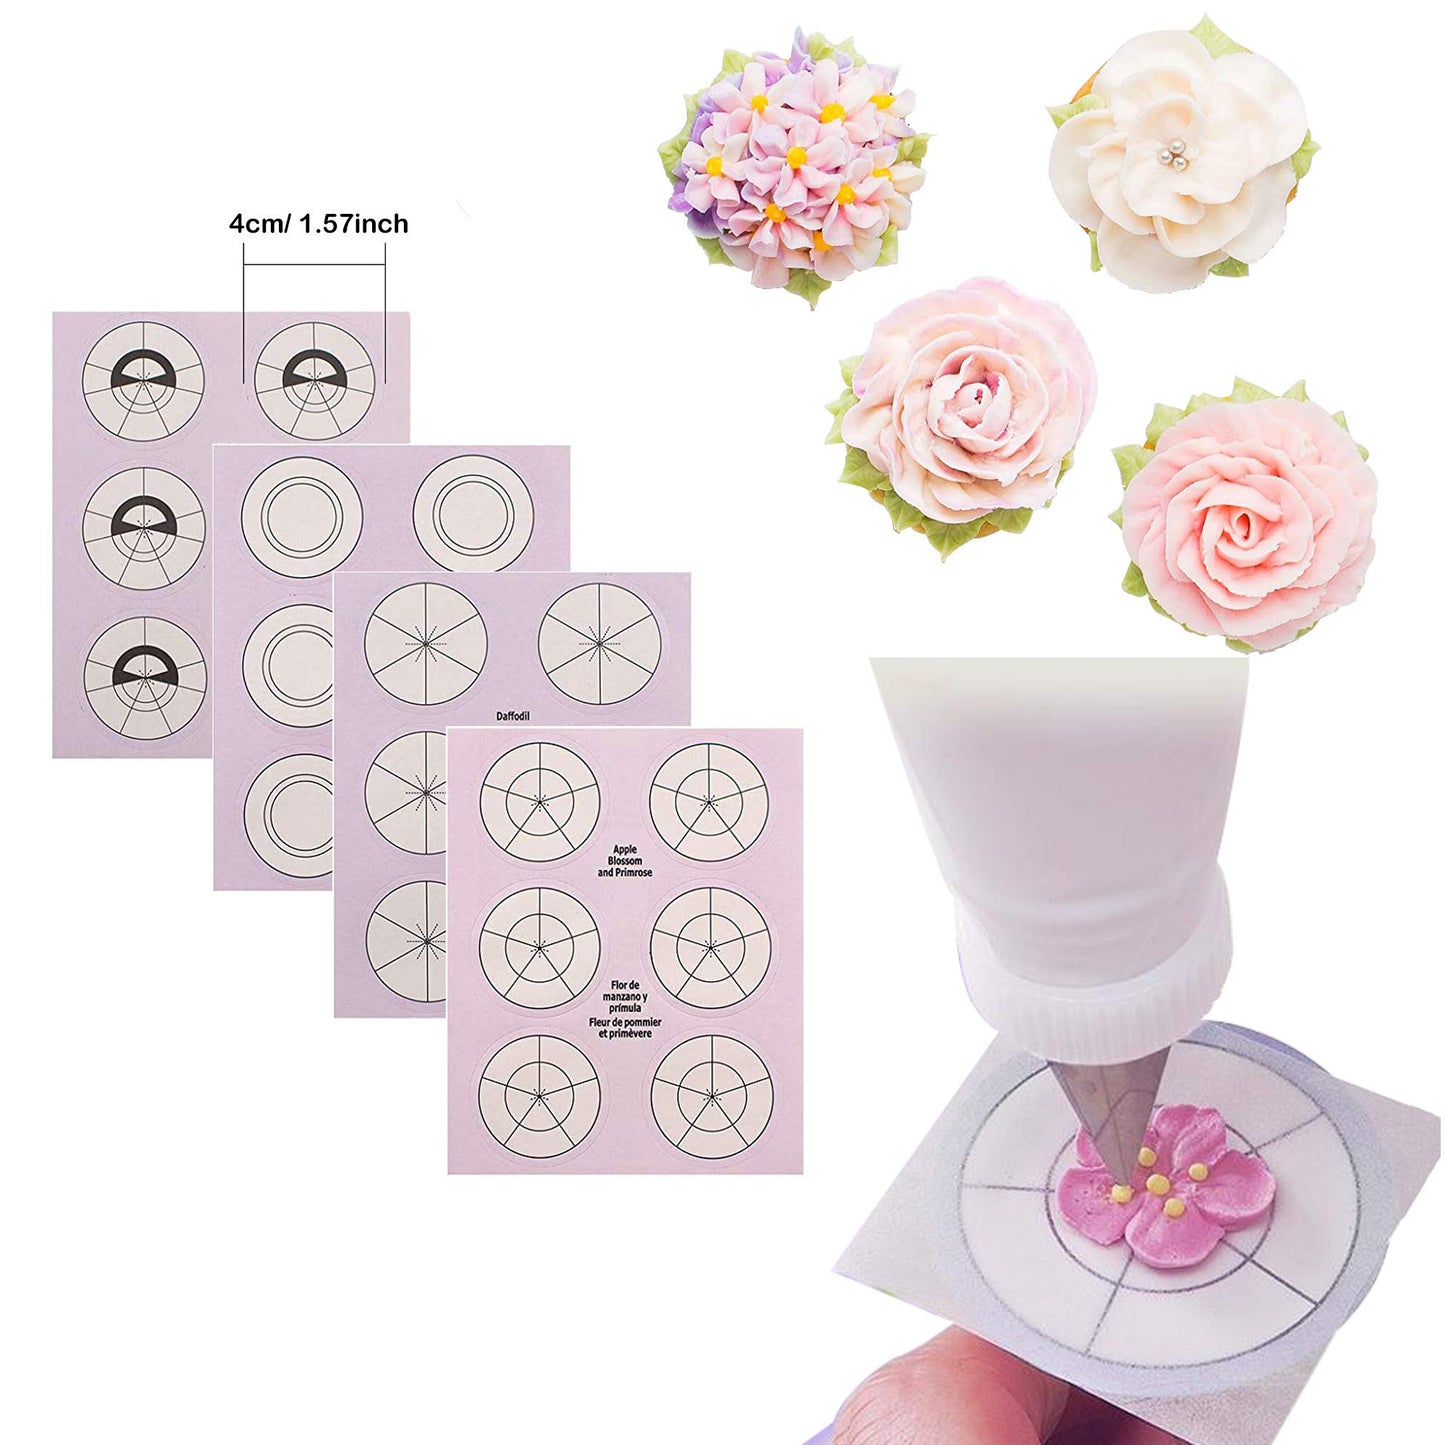 Flower Scale Sticker for Flower Nail Lifter Cake Decorating Supplies Tools